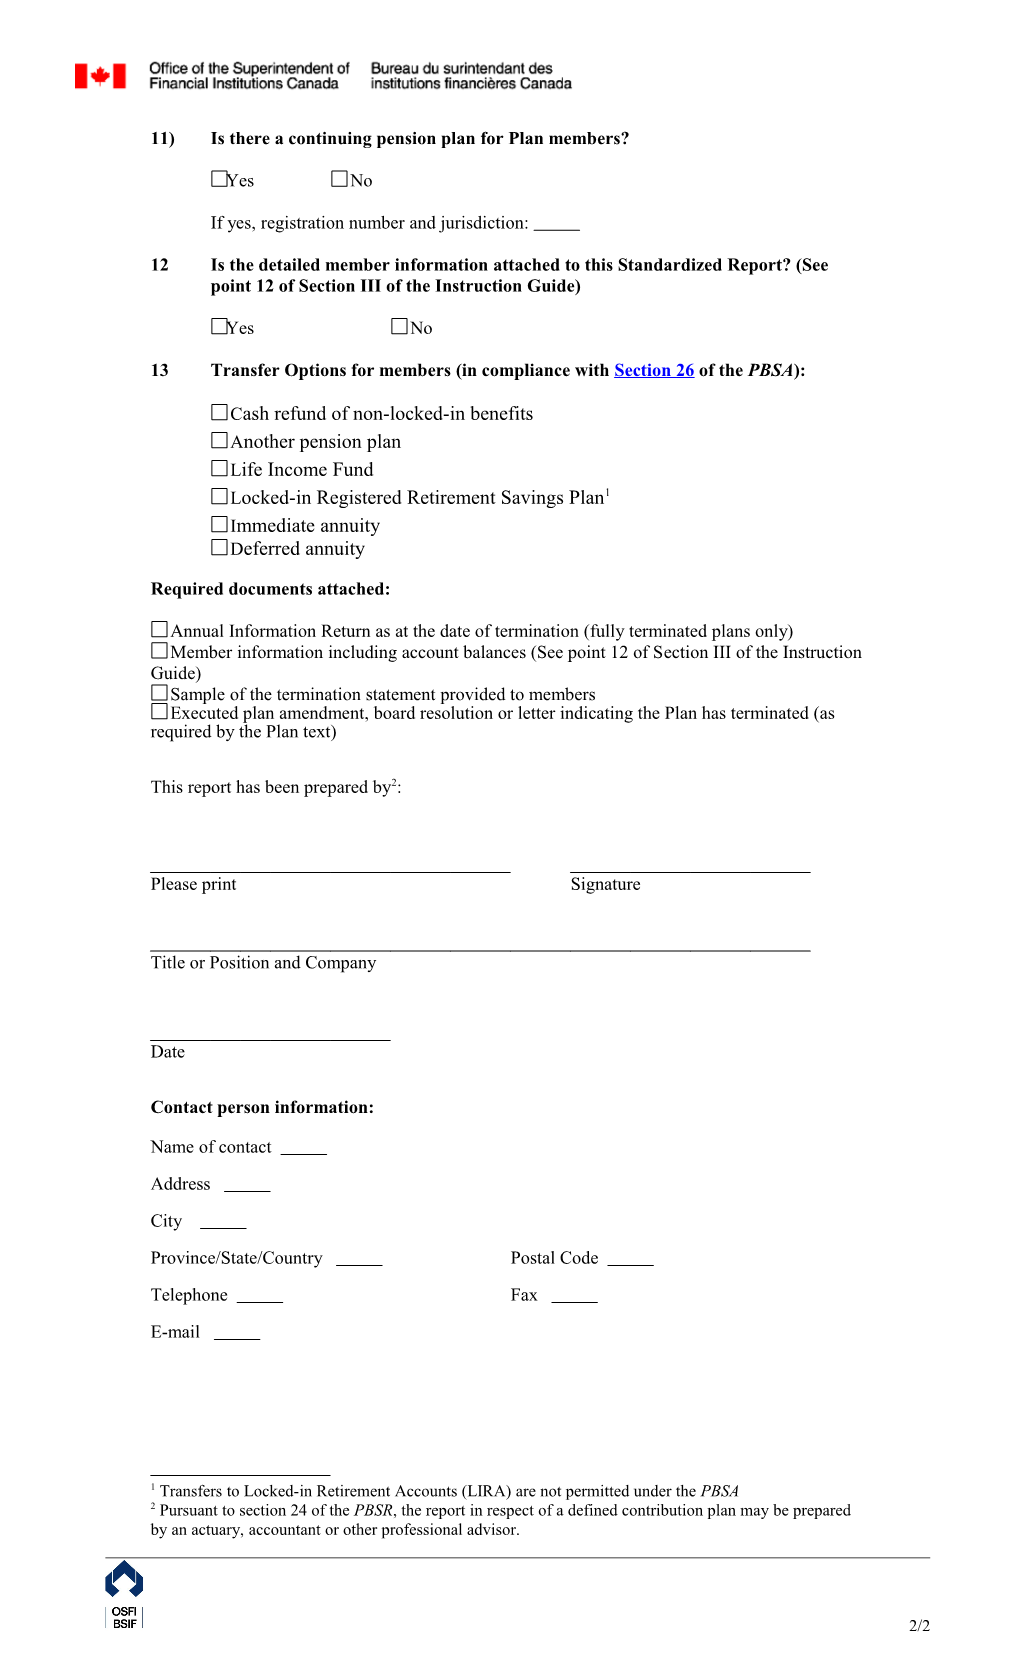 Application for Registration of a Pension Plan